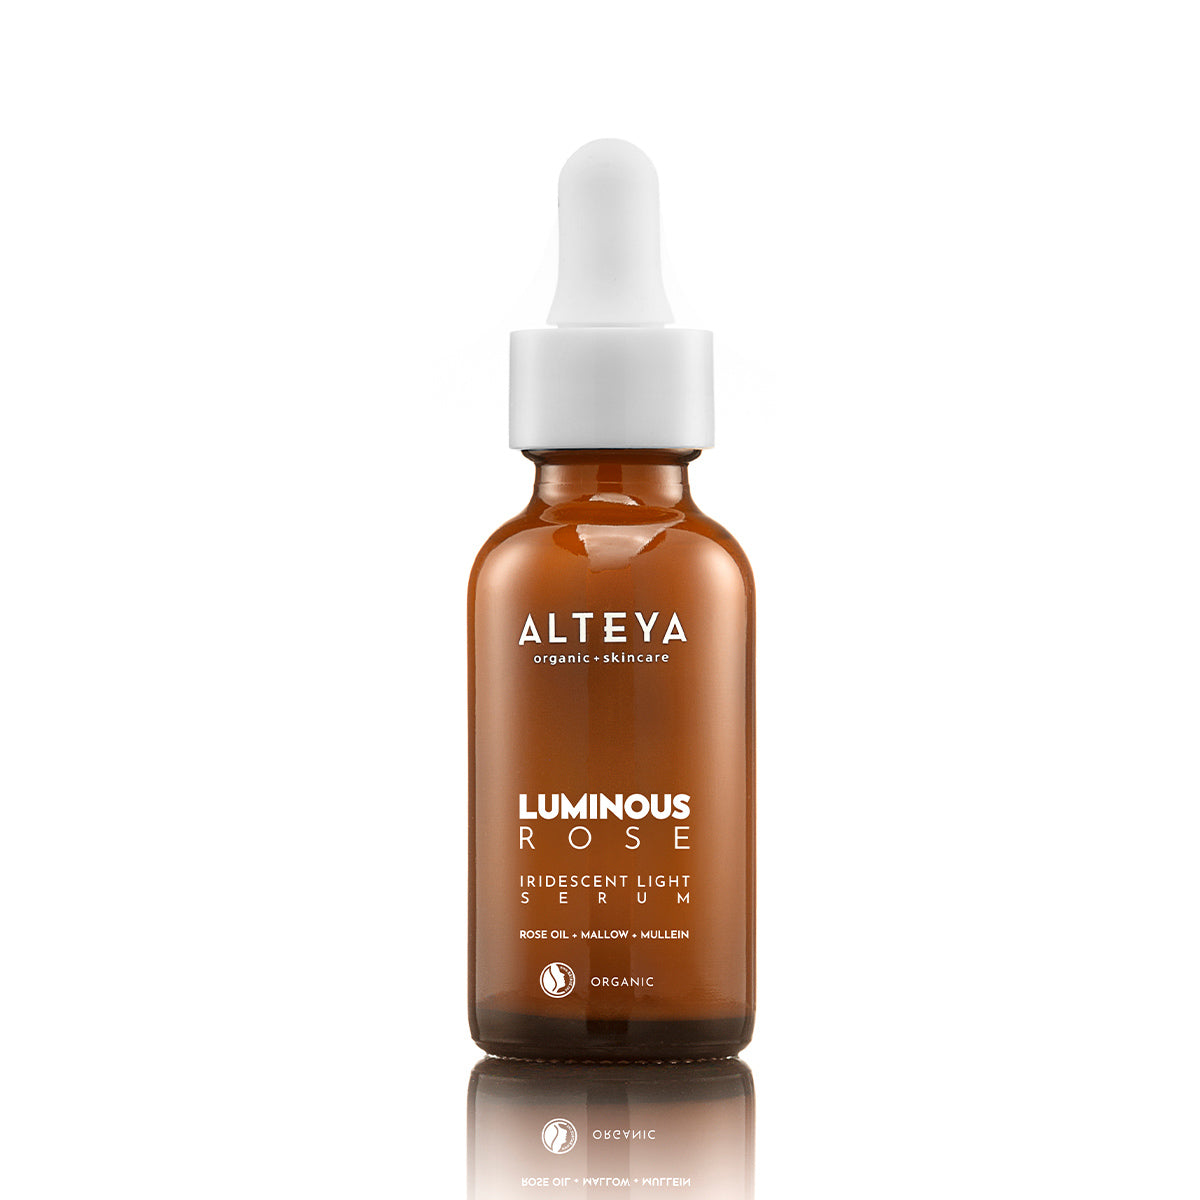 A brown glass bottle with a white dropper cap labeled "ALTEYA Organic Skincare Iridescent Light Serum Luminous Rose." The label notes it is a moisturizing serum containing brightening Mullein Extract, rose oil, mallow, and willowherb, and is organic.